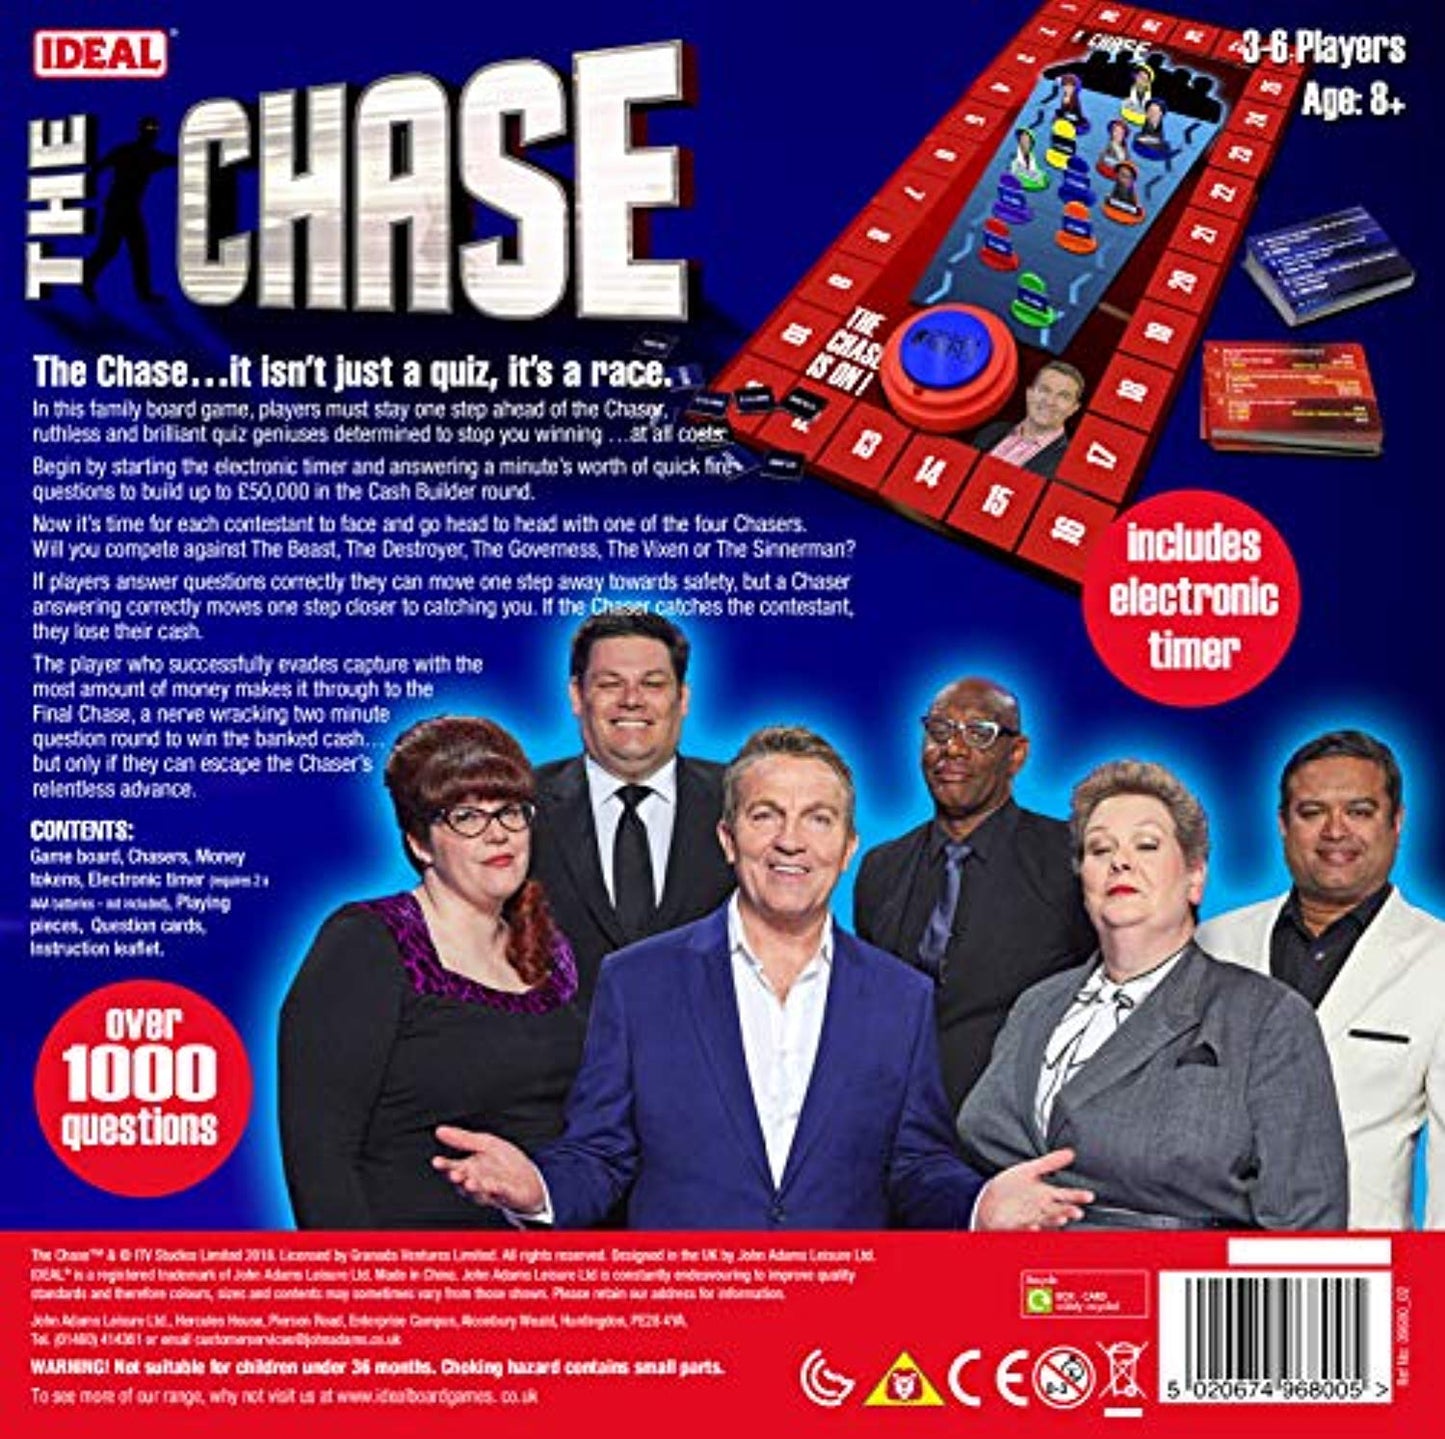 The Chase TV Show Board Game - Offer Games